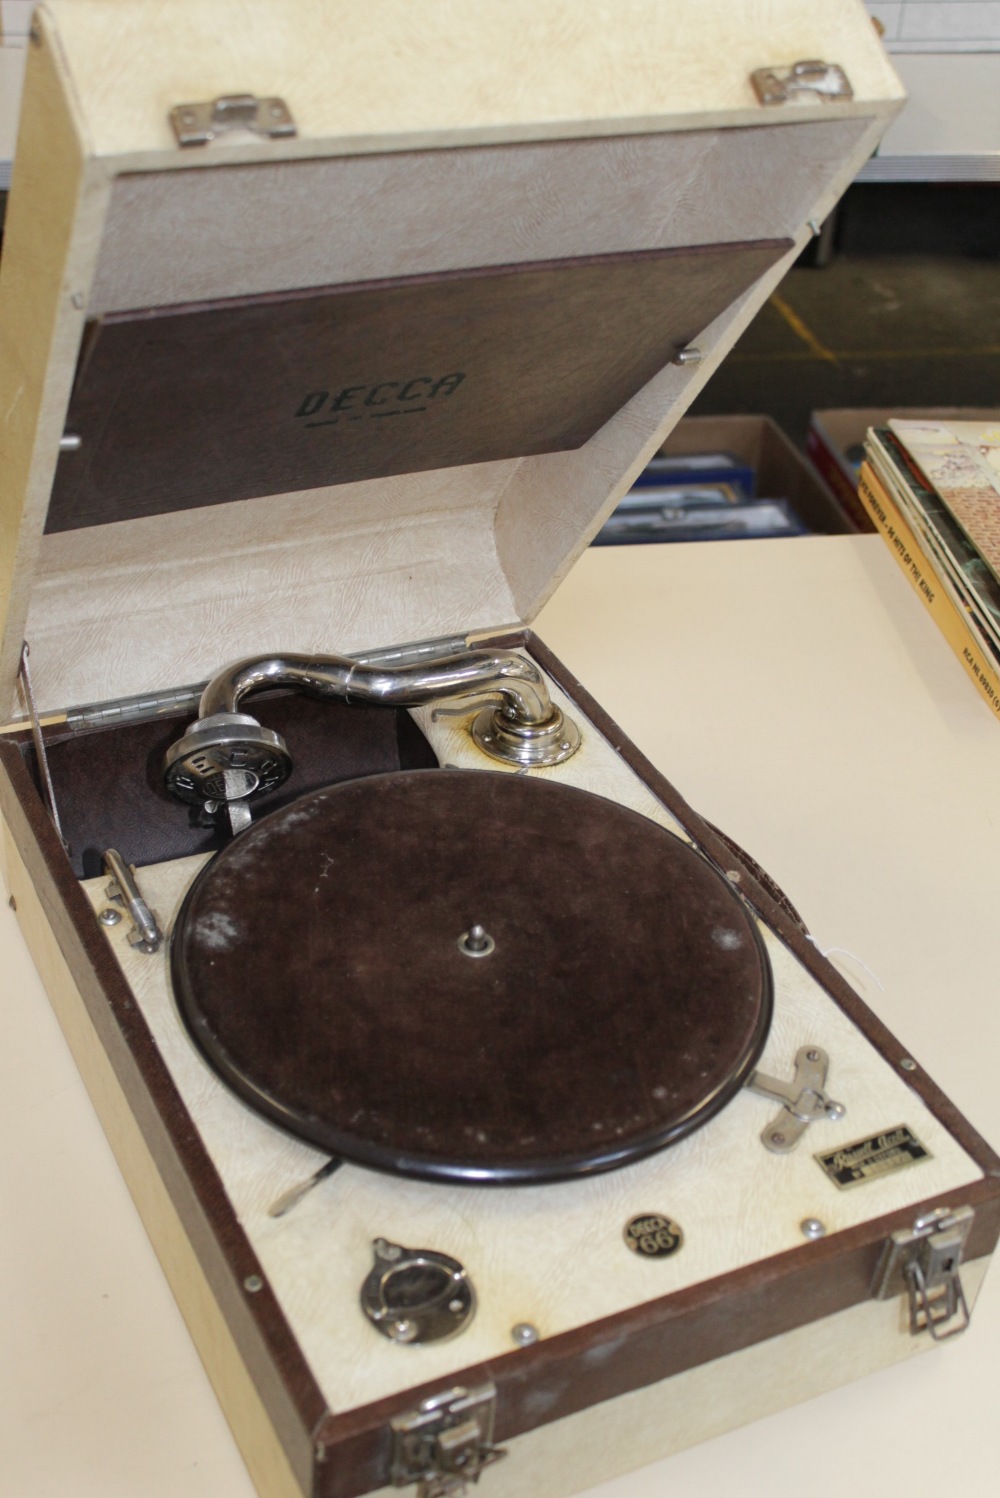 A Decca 66 portable gramophone, with a Decca reproducer, in a cream and brown rexine covered case.